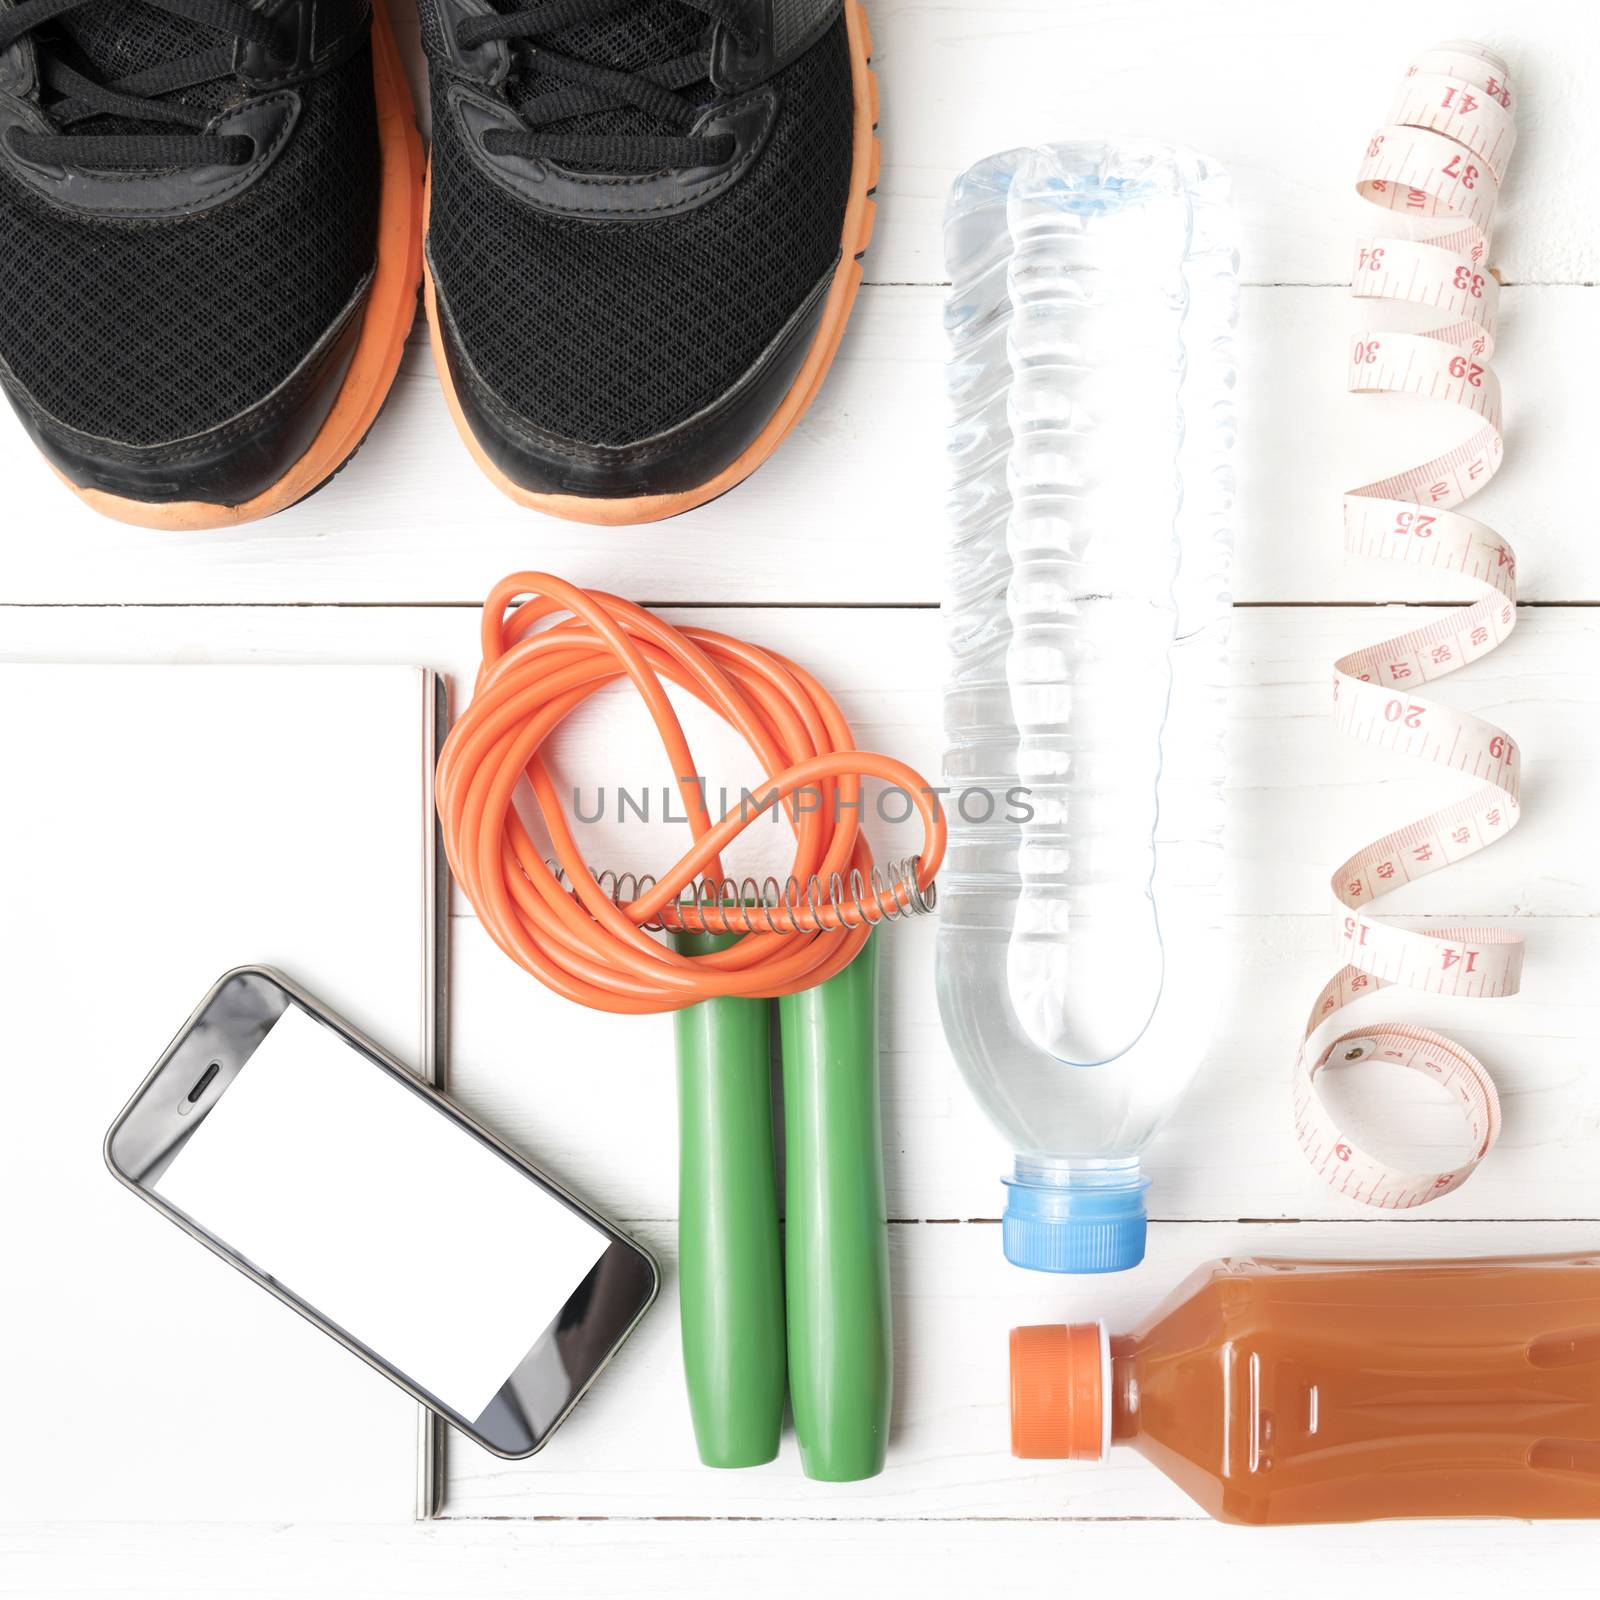 fitness equipment:running shoes,jumping rope,notepad,phone,water,juice and measuring tape on white wood background